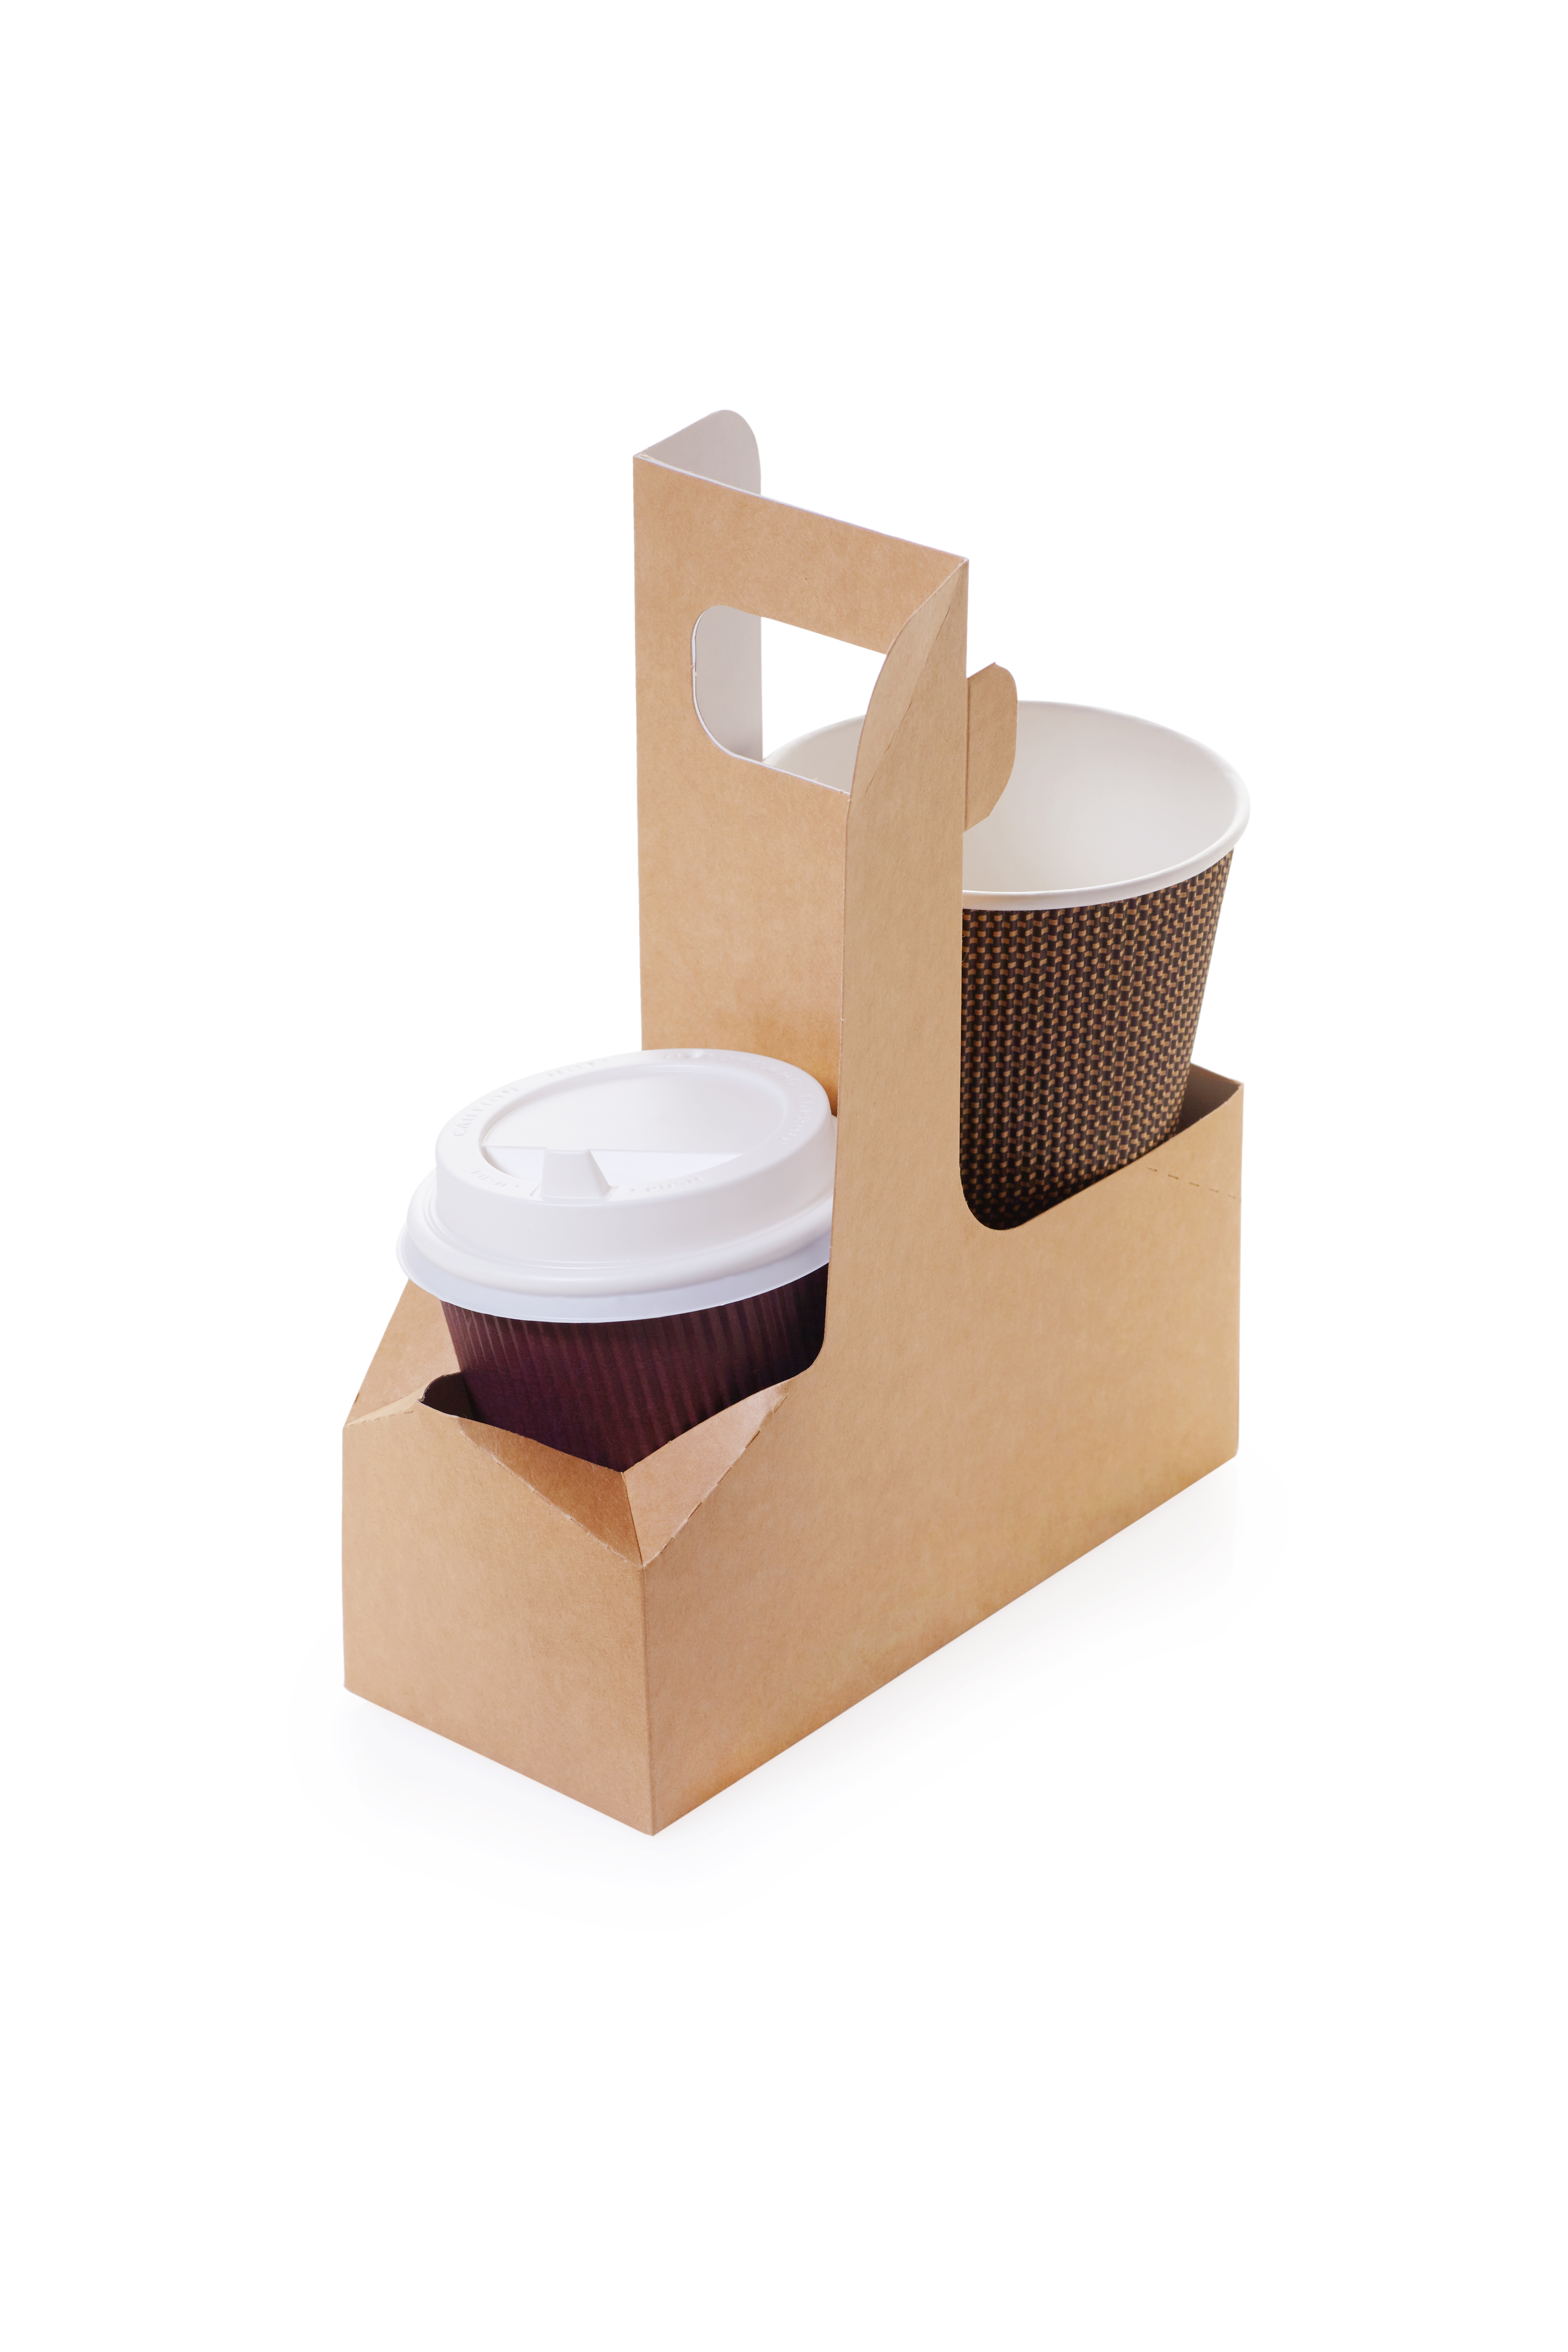 OSQ CUPHOLDER Carrying Holders for Cups